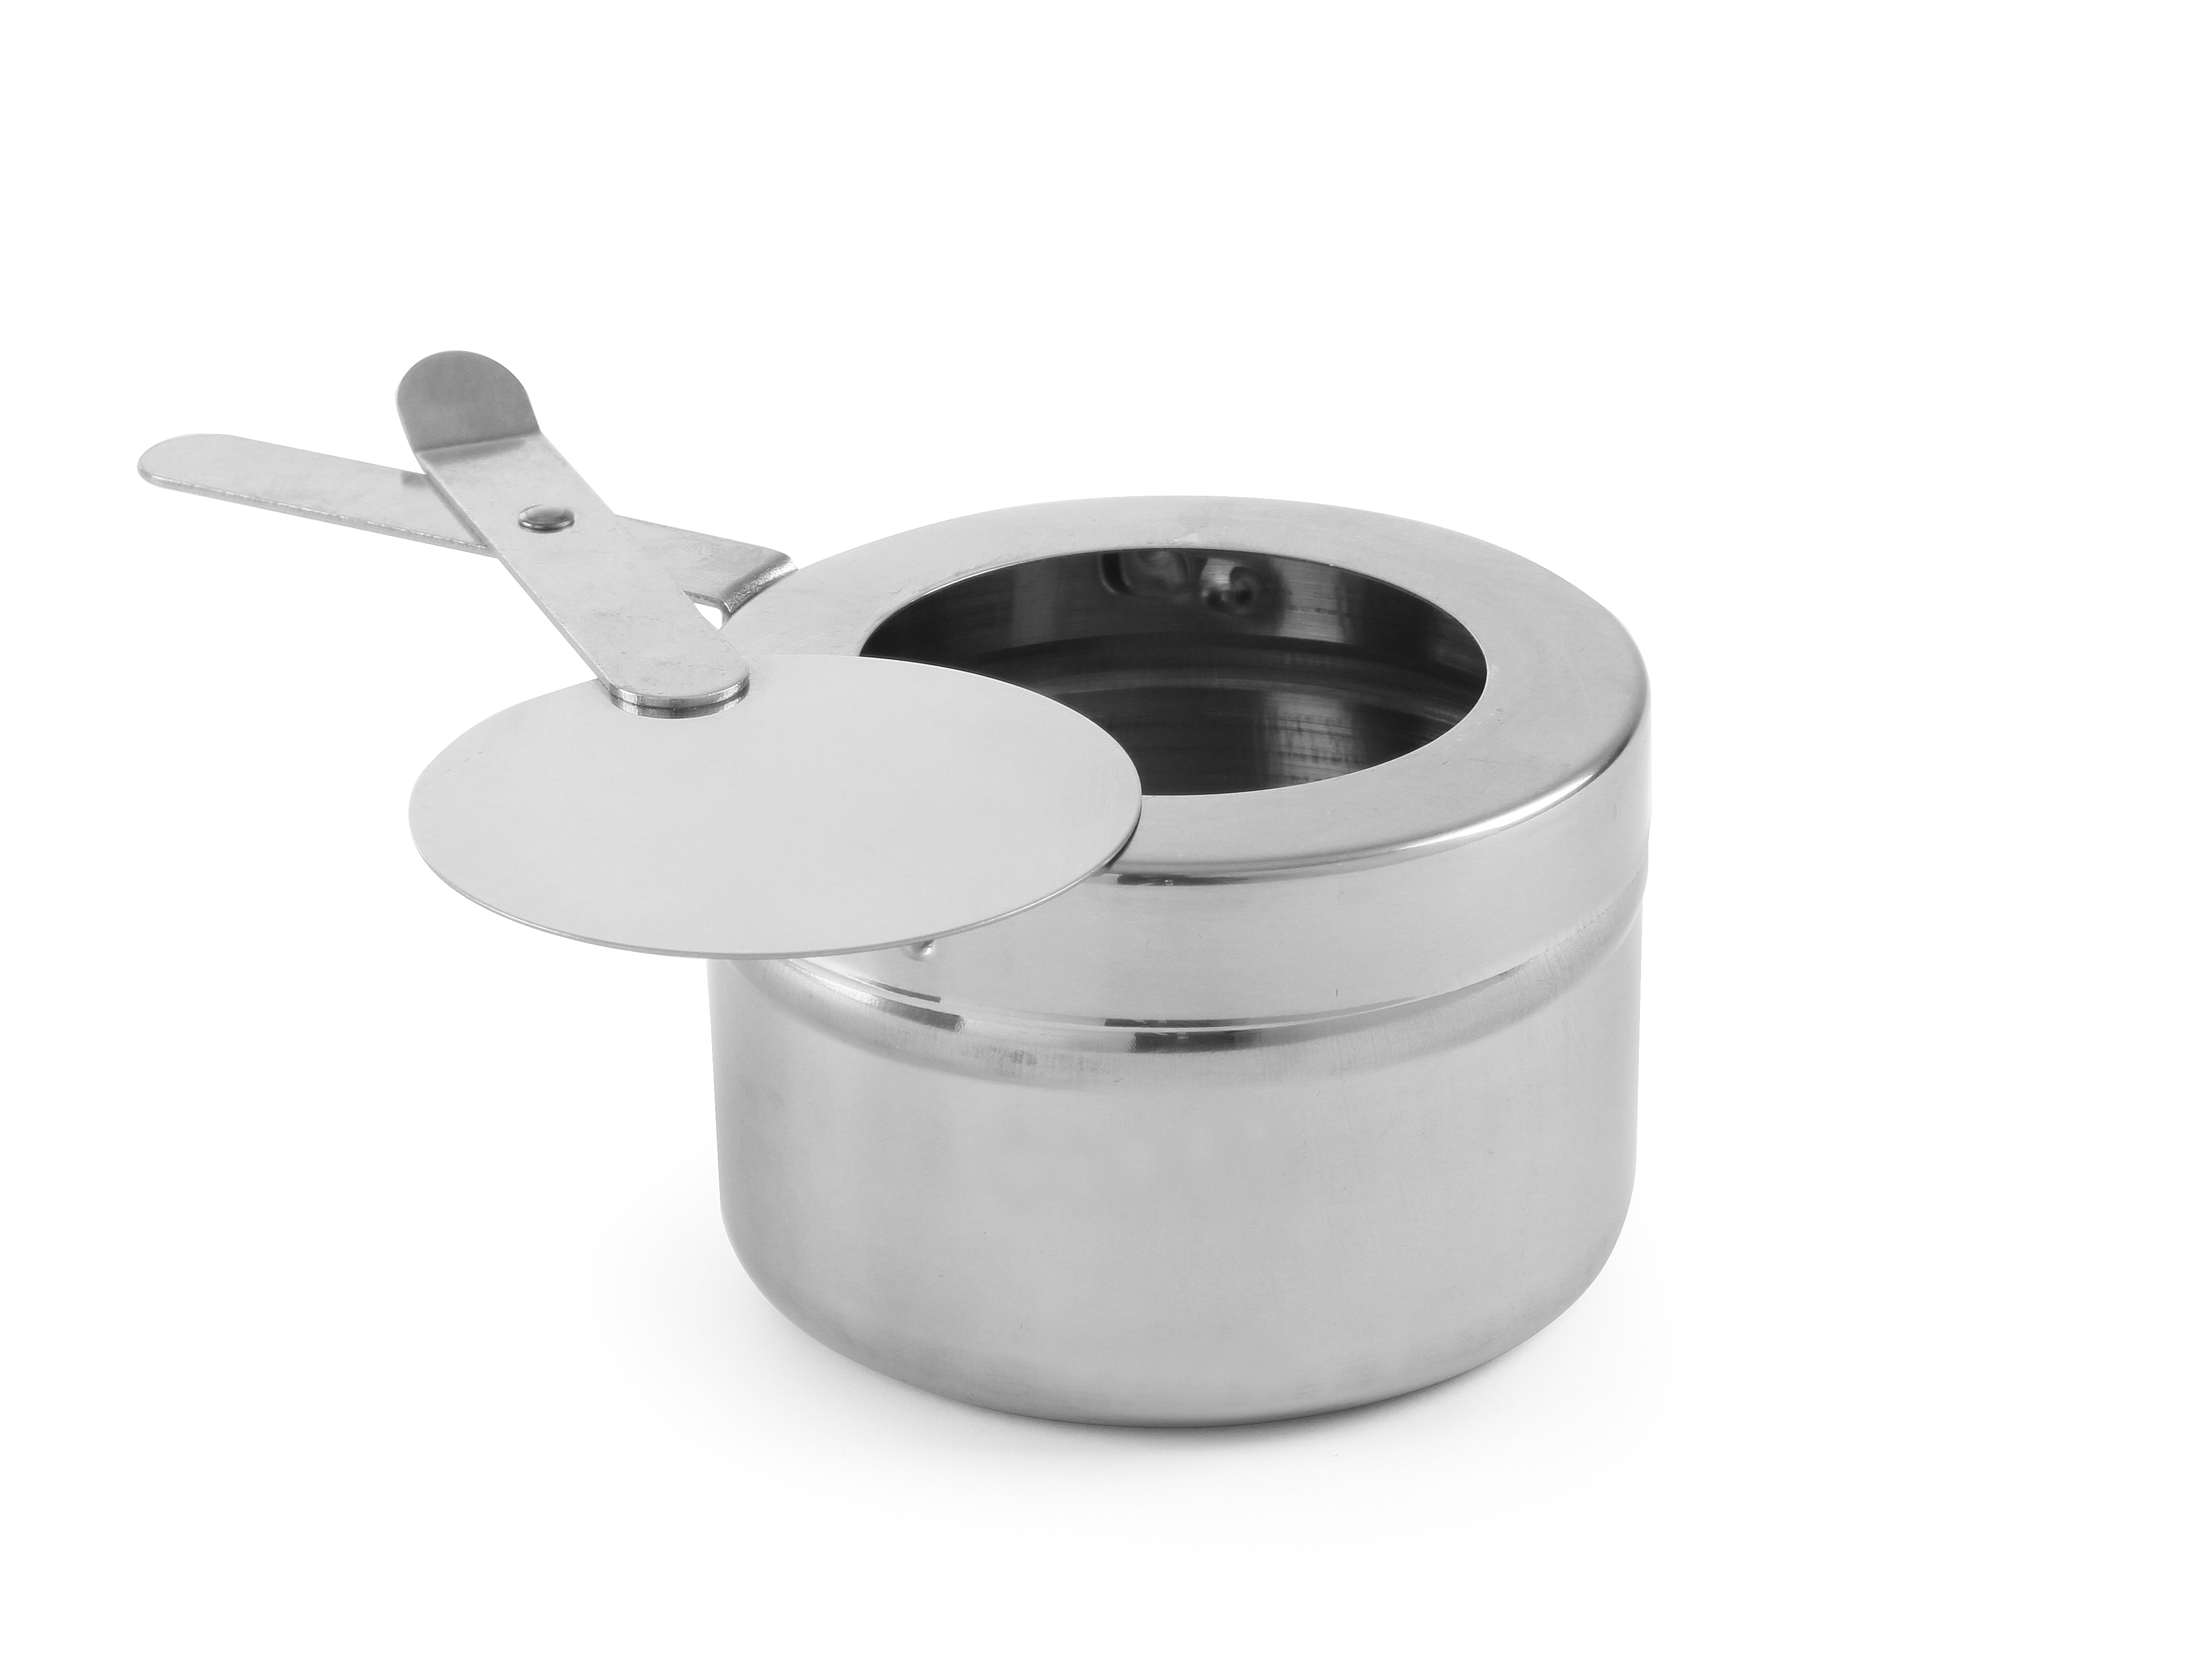 Combustible pour chafing dish - HENDI Tools for Chefs